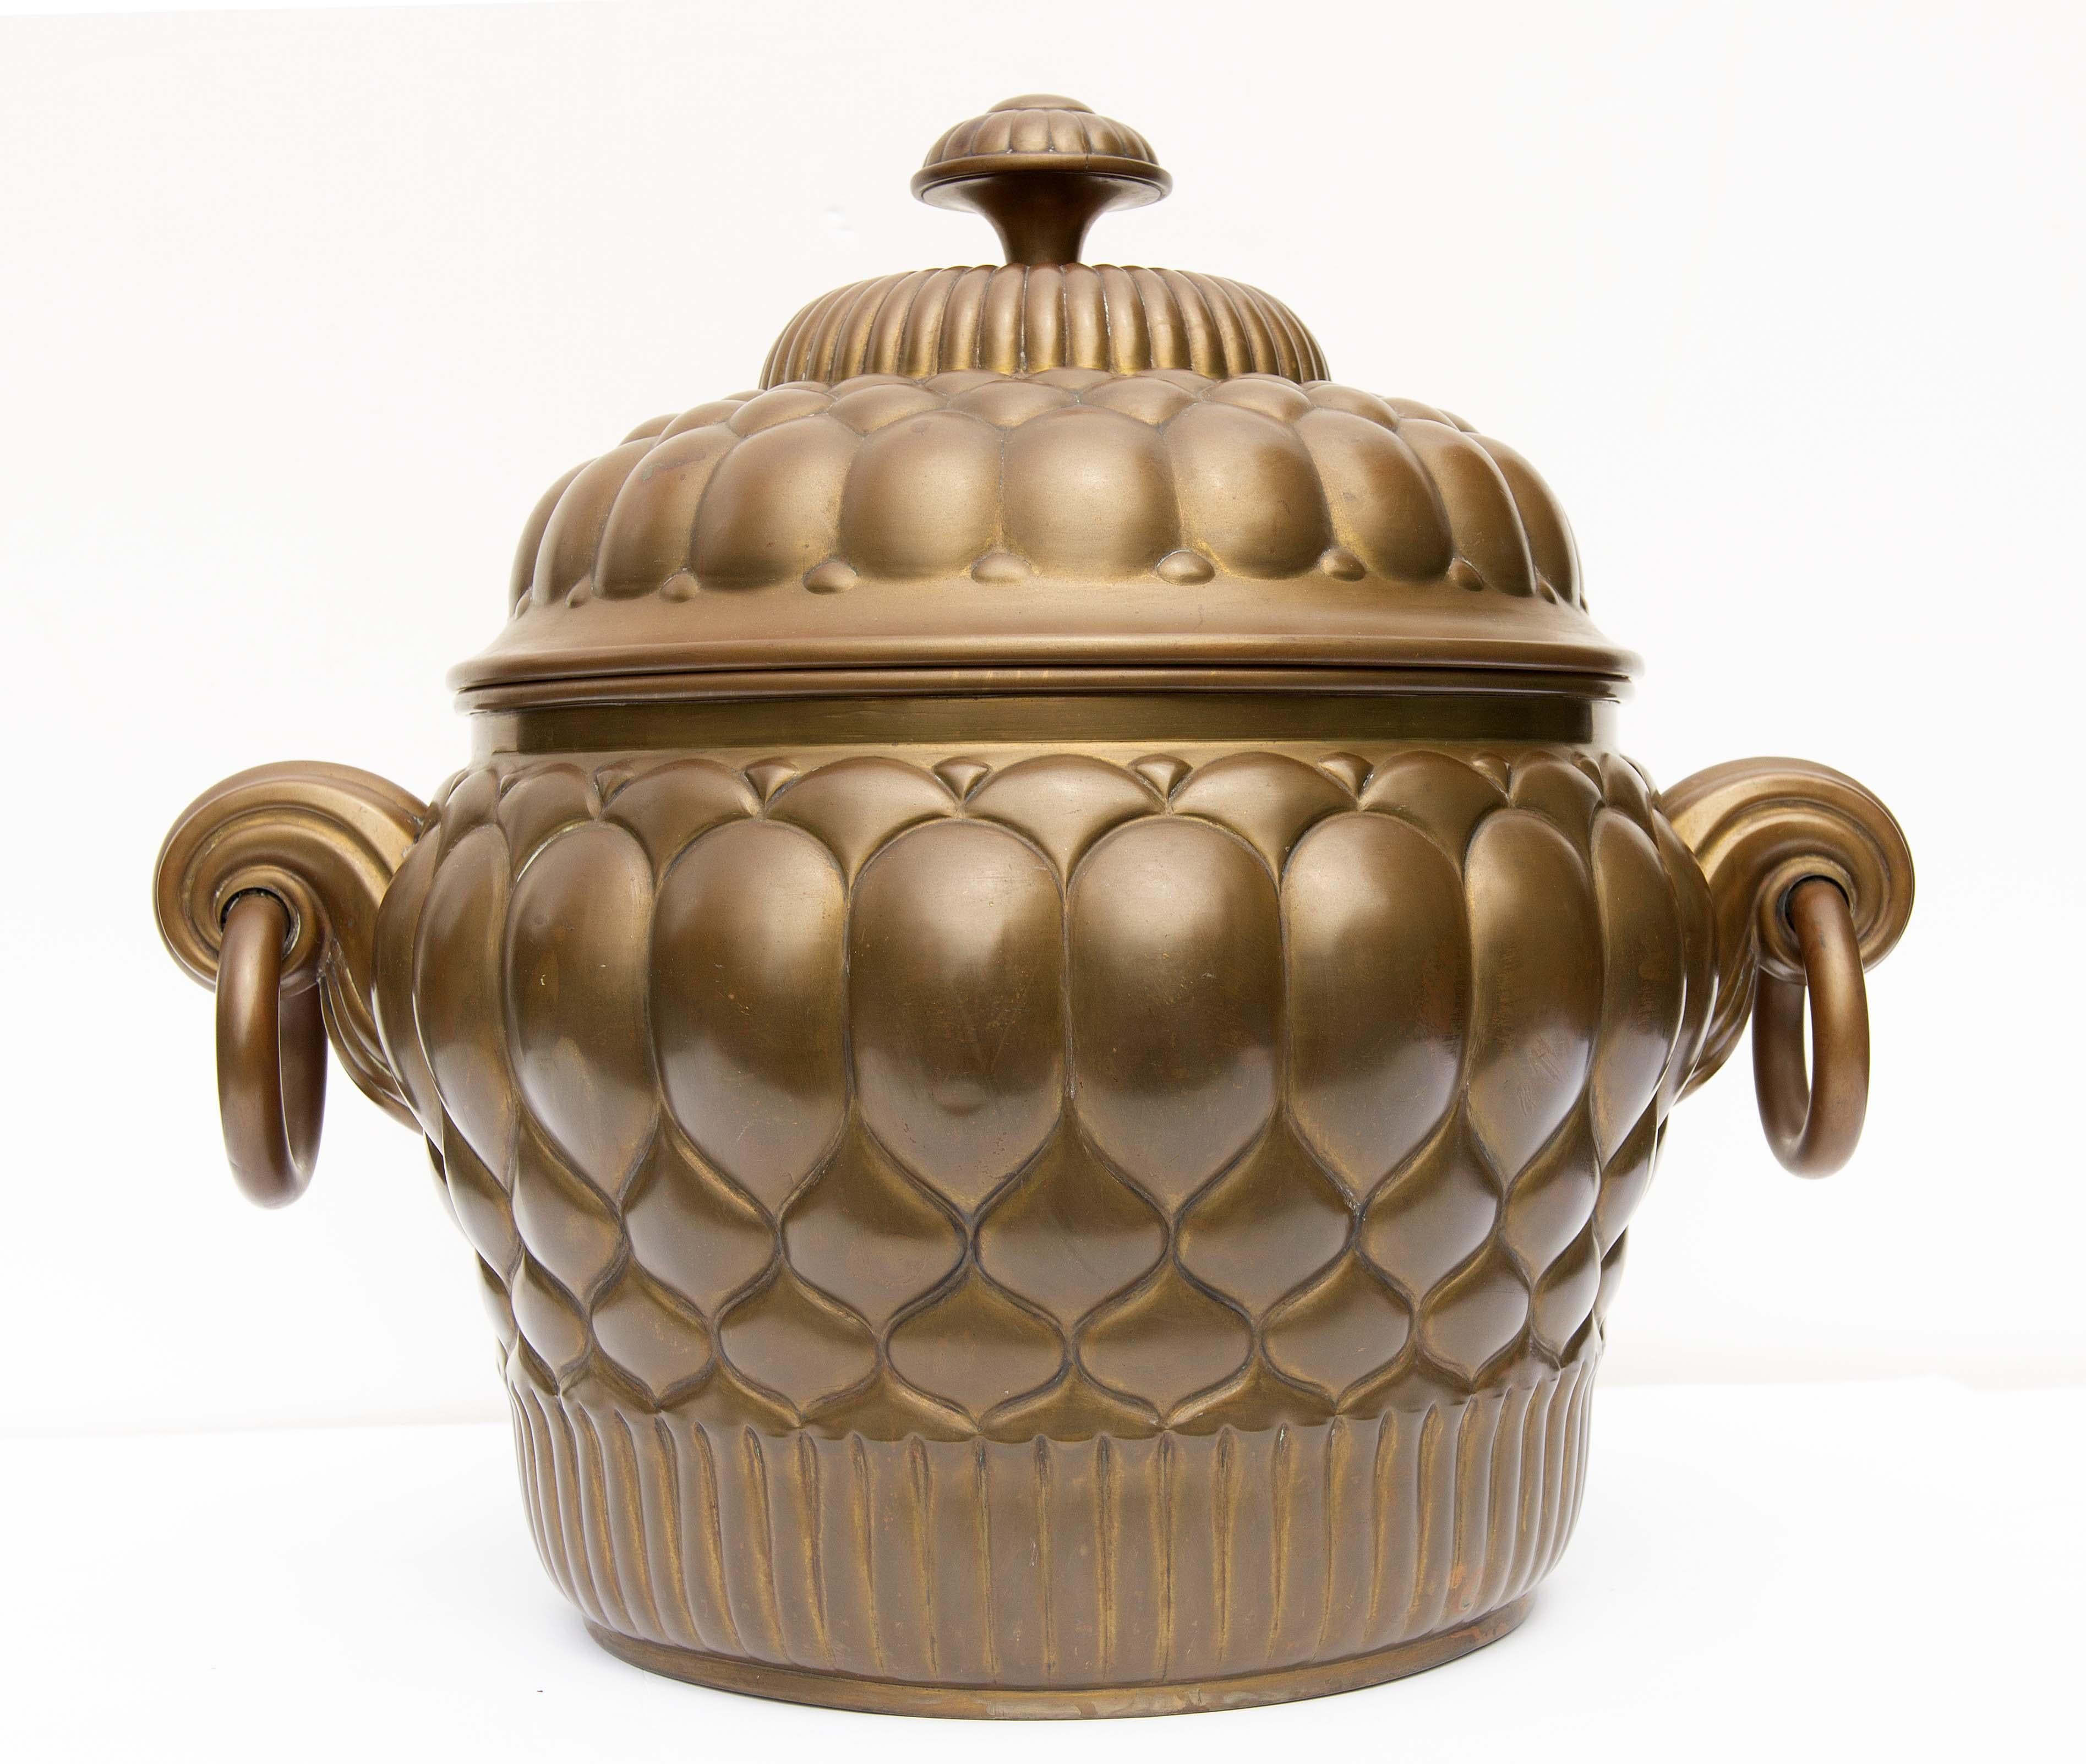 Art deco two handled covered bronze urn. German, 1920s.